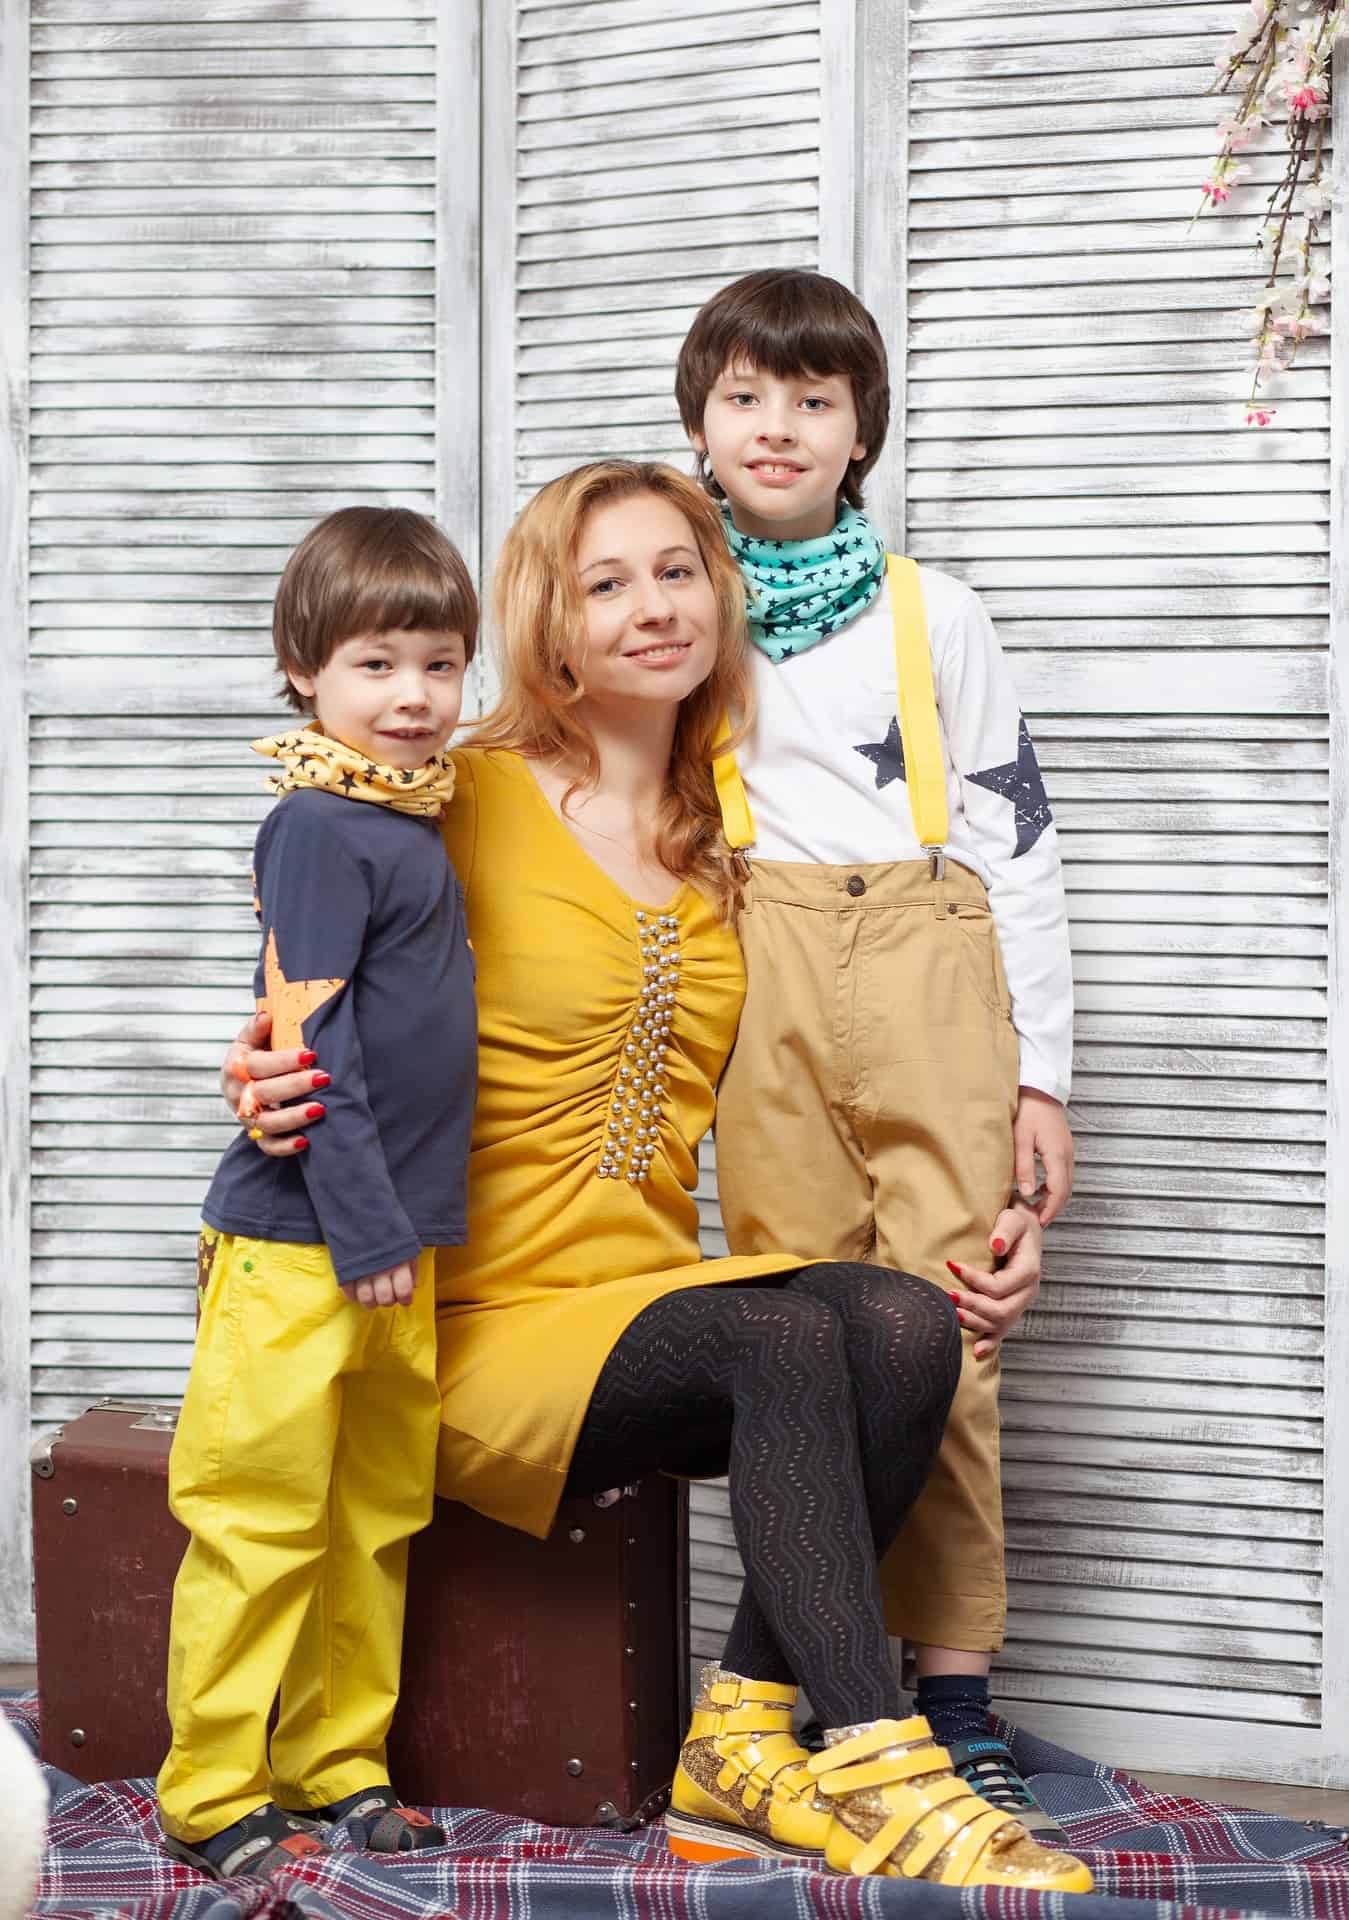 Contrast-and-colors 70+ Best Family Photoshoot Outfit Ideas That You Must Check